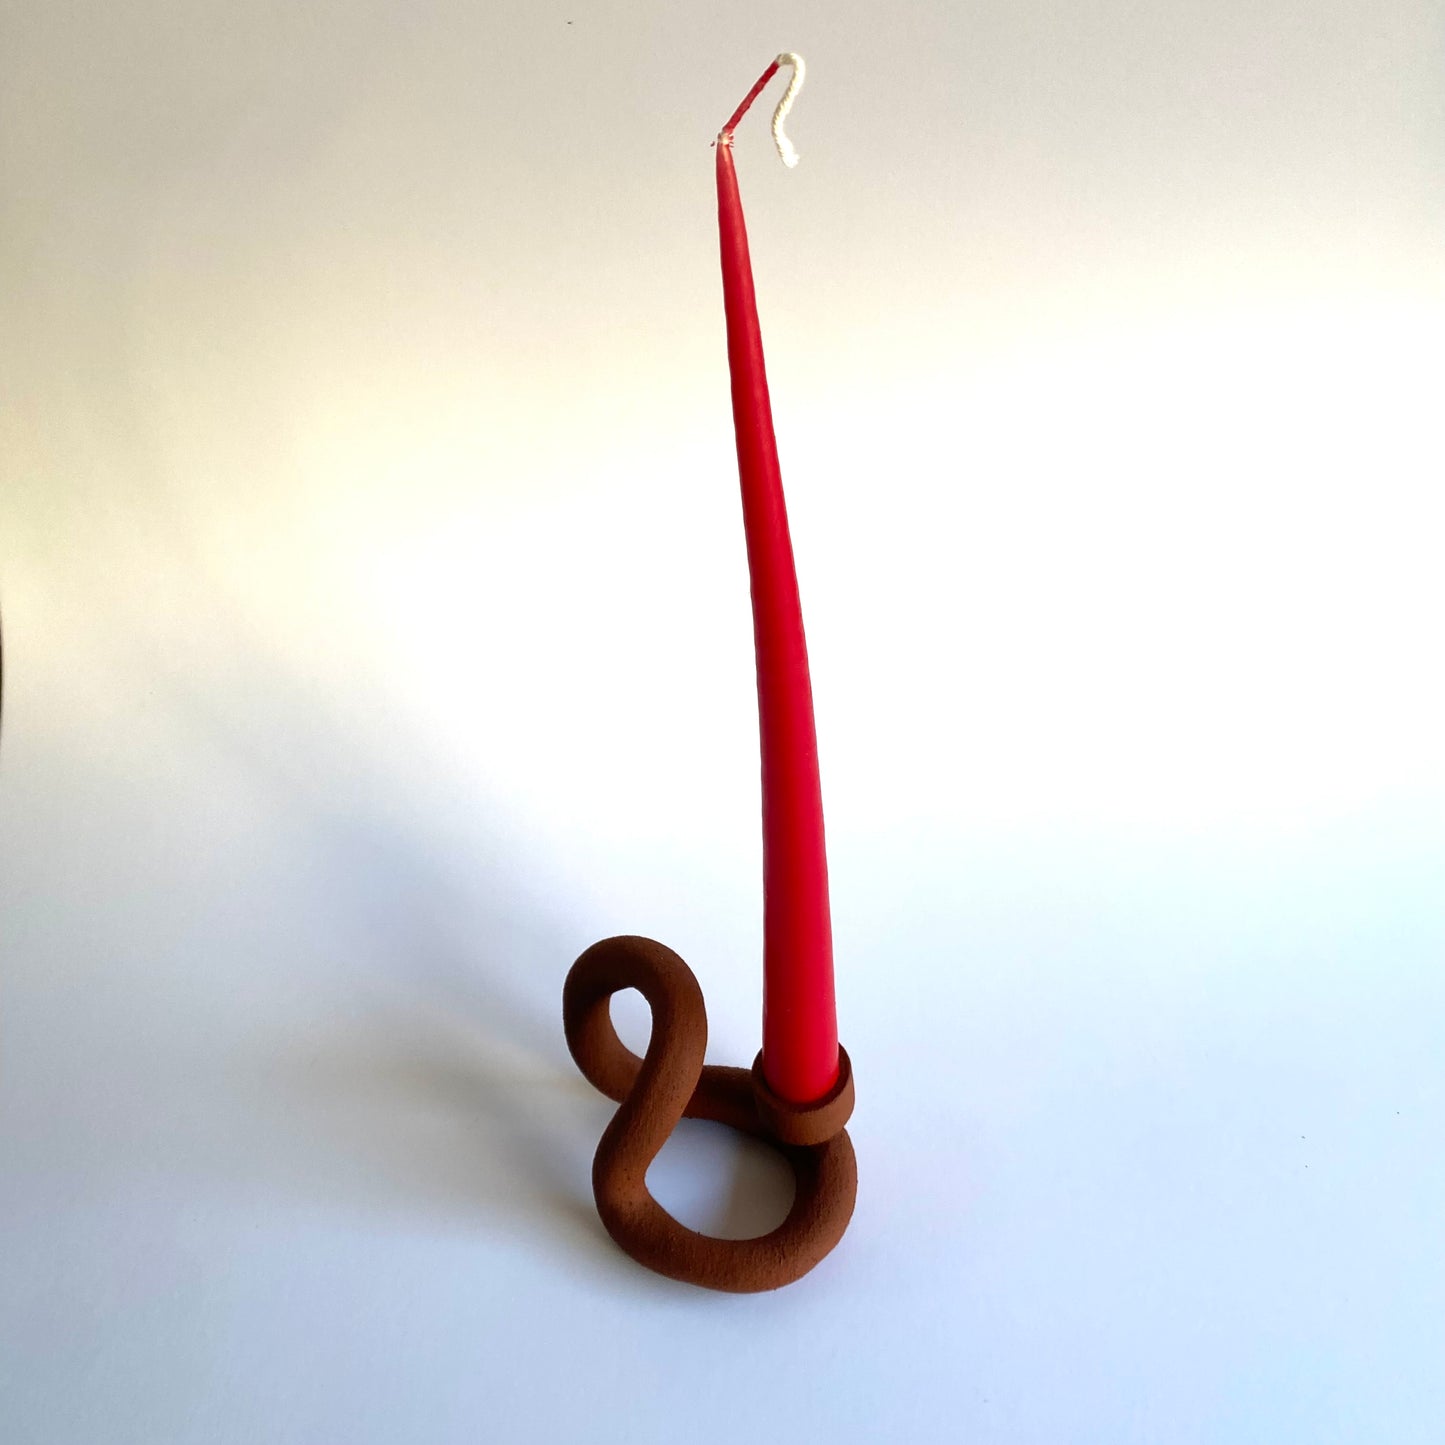 Infinity Candle Holder in Terra